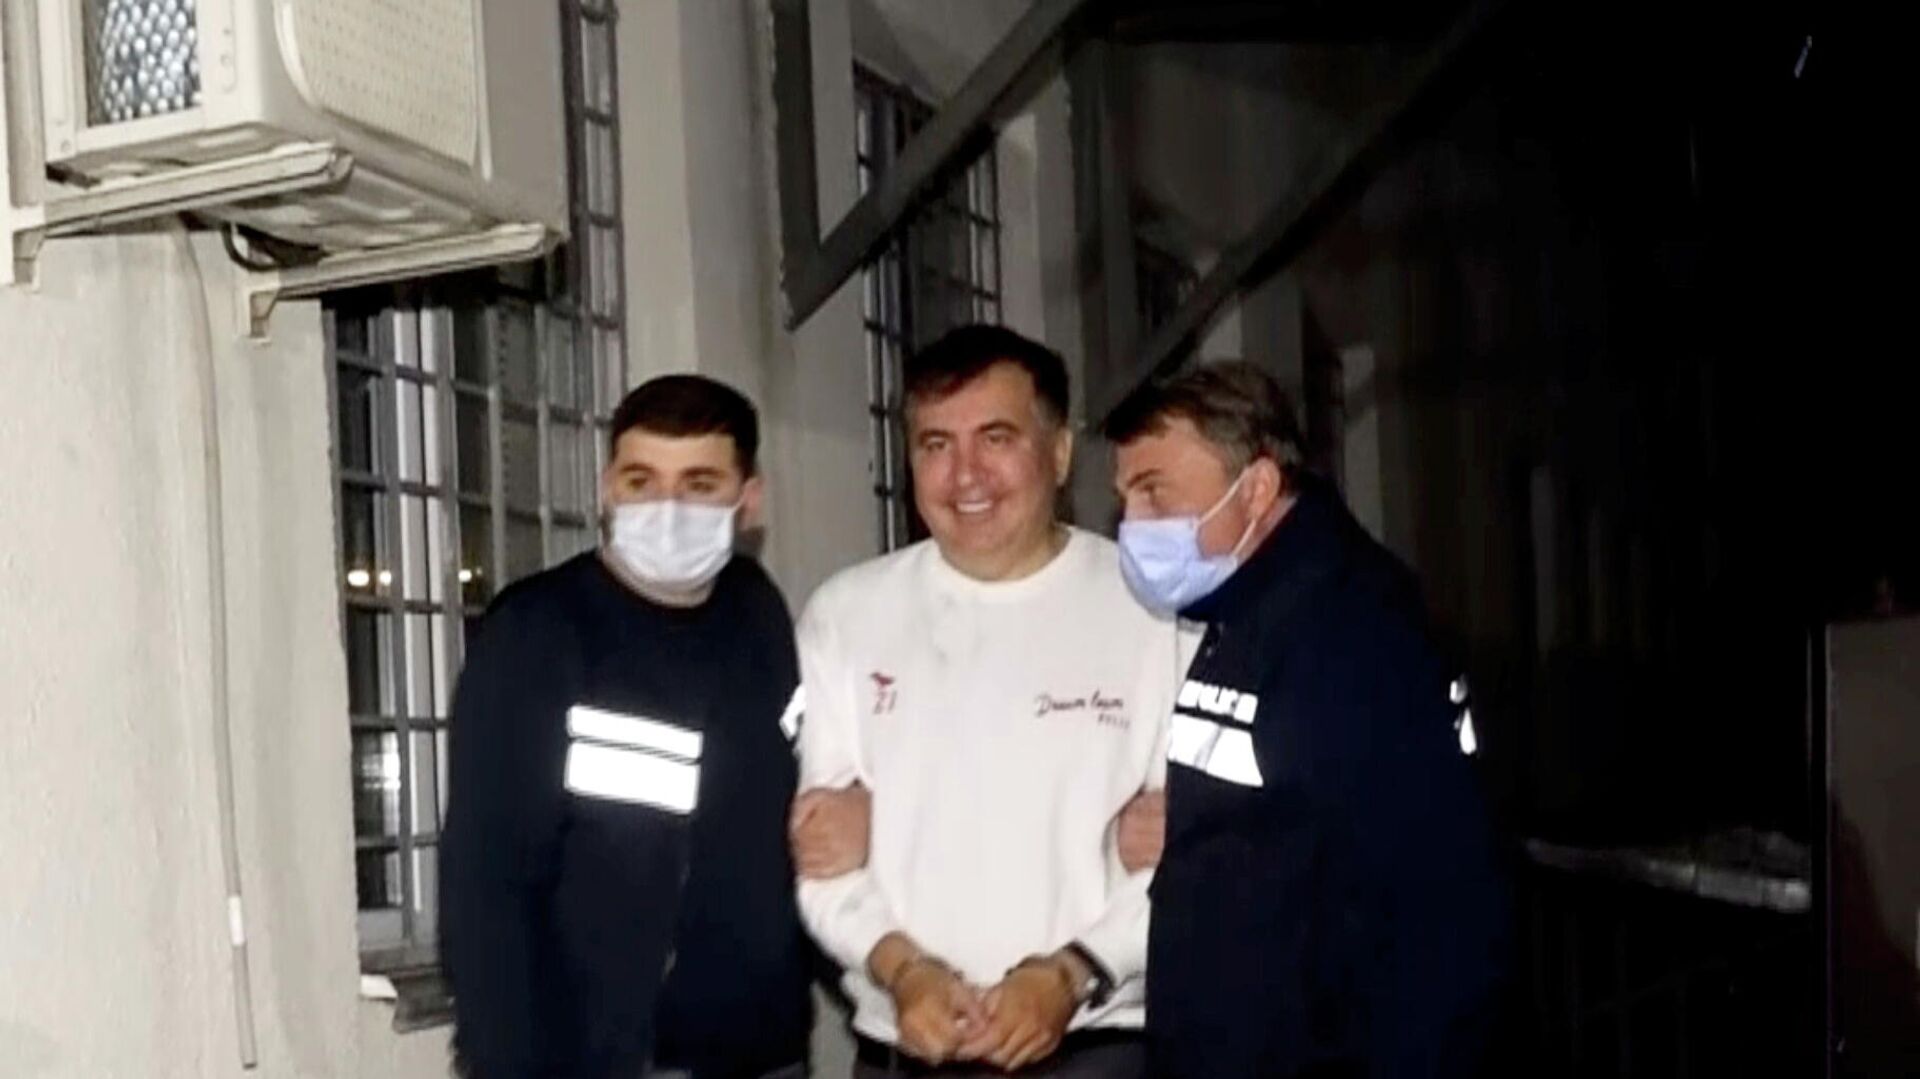 Georgia's former President Mikheil Saakashvili, who was detained after returning to the country, is escorted by police officers as he arrives at a prison in Rustavi, Georgia October 1, 2021, in this still image taken from video. - Sputnik International, 1920, 01.10.2021